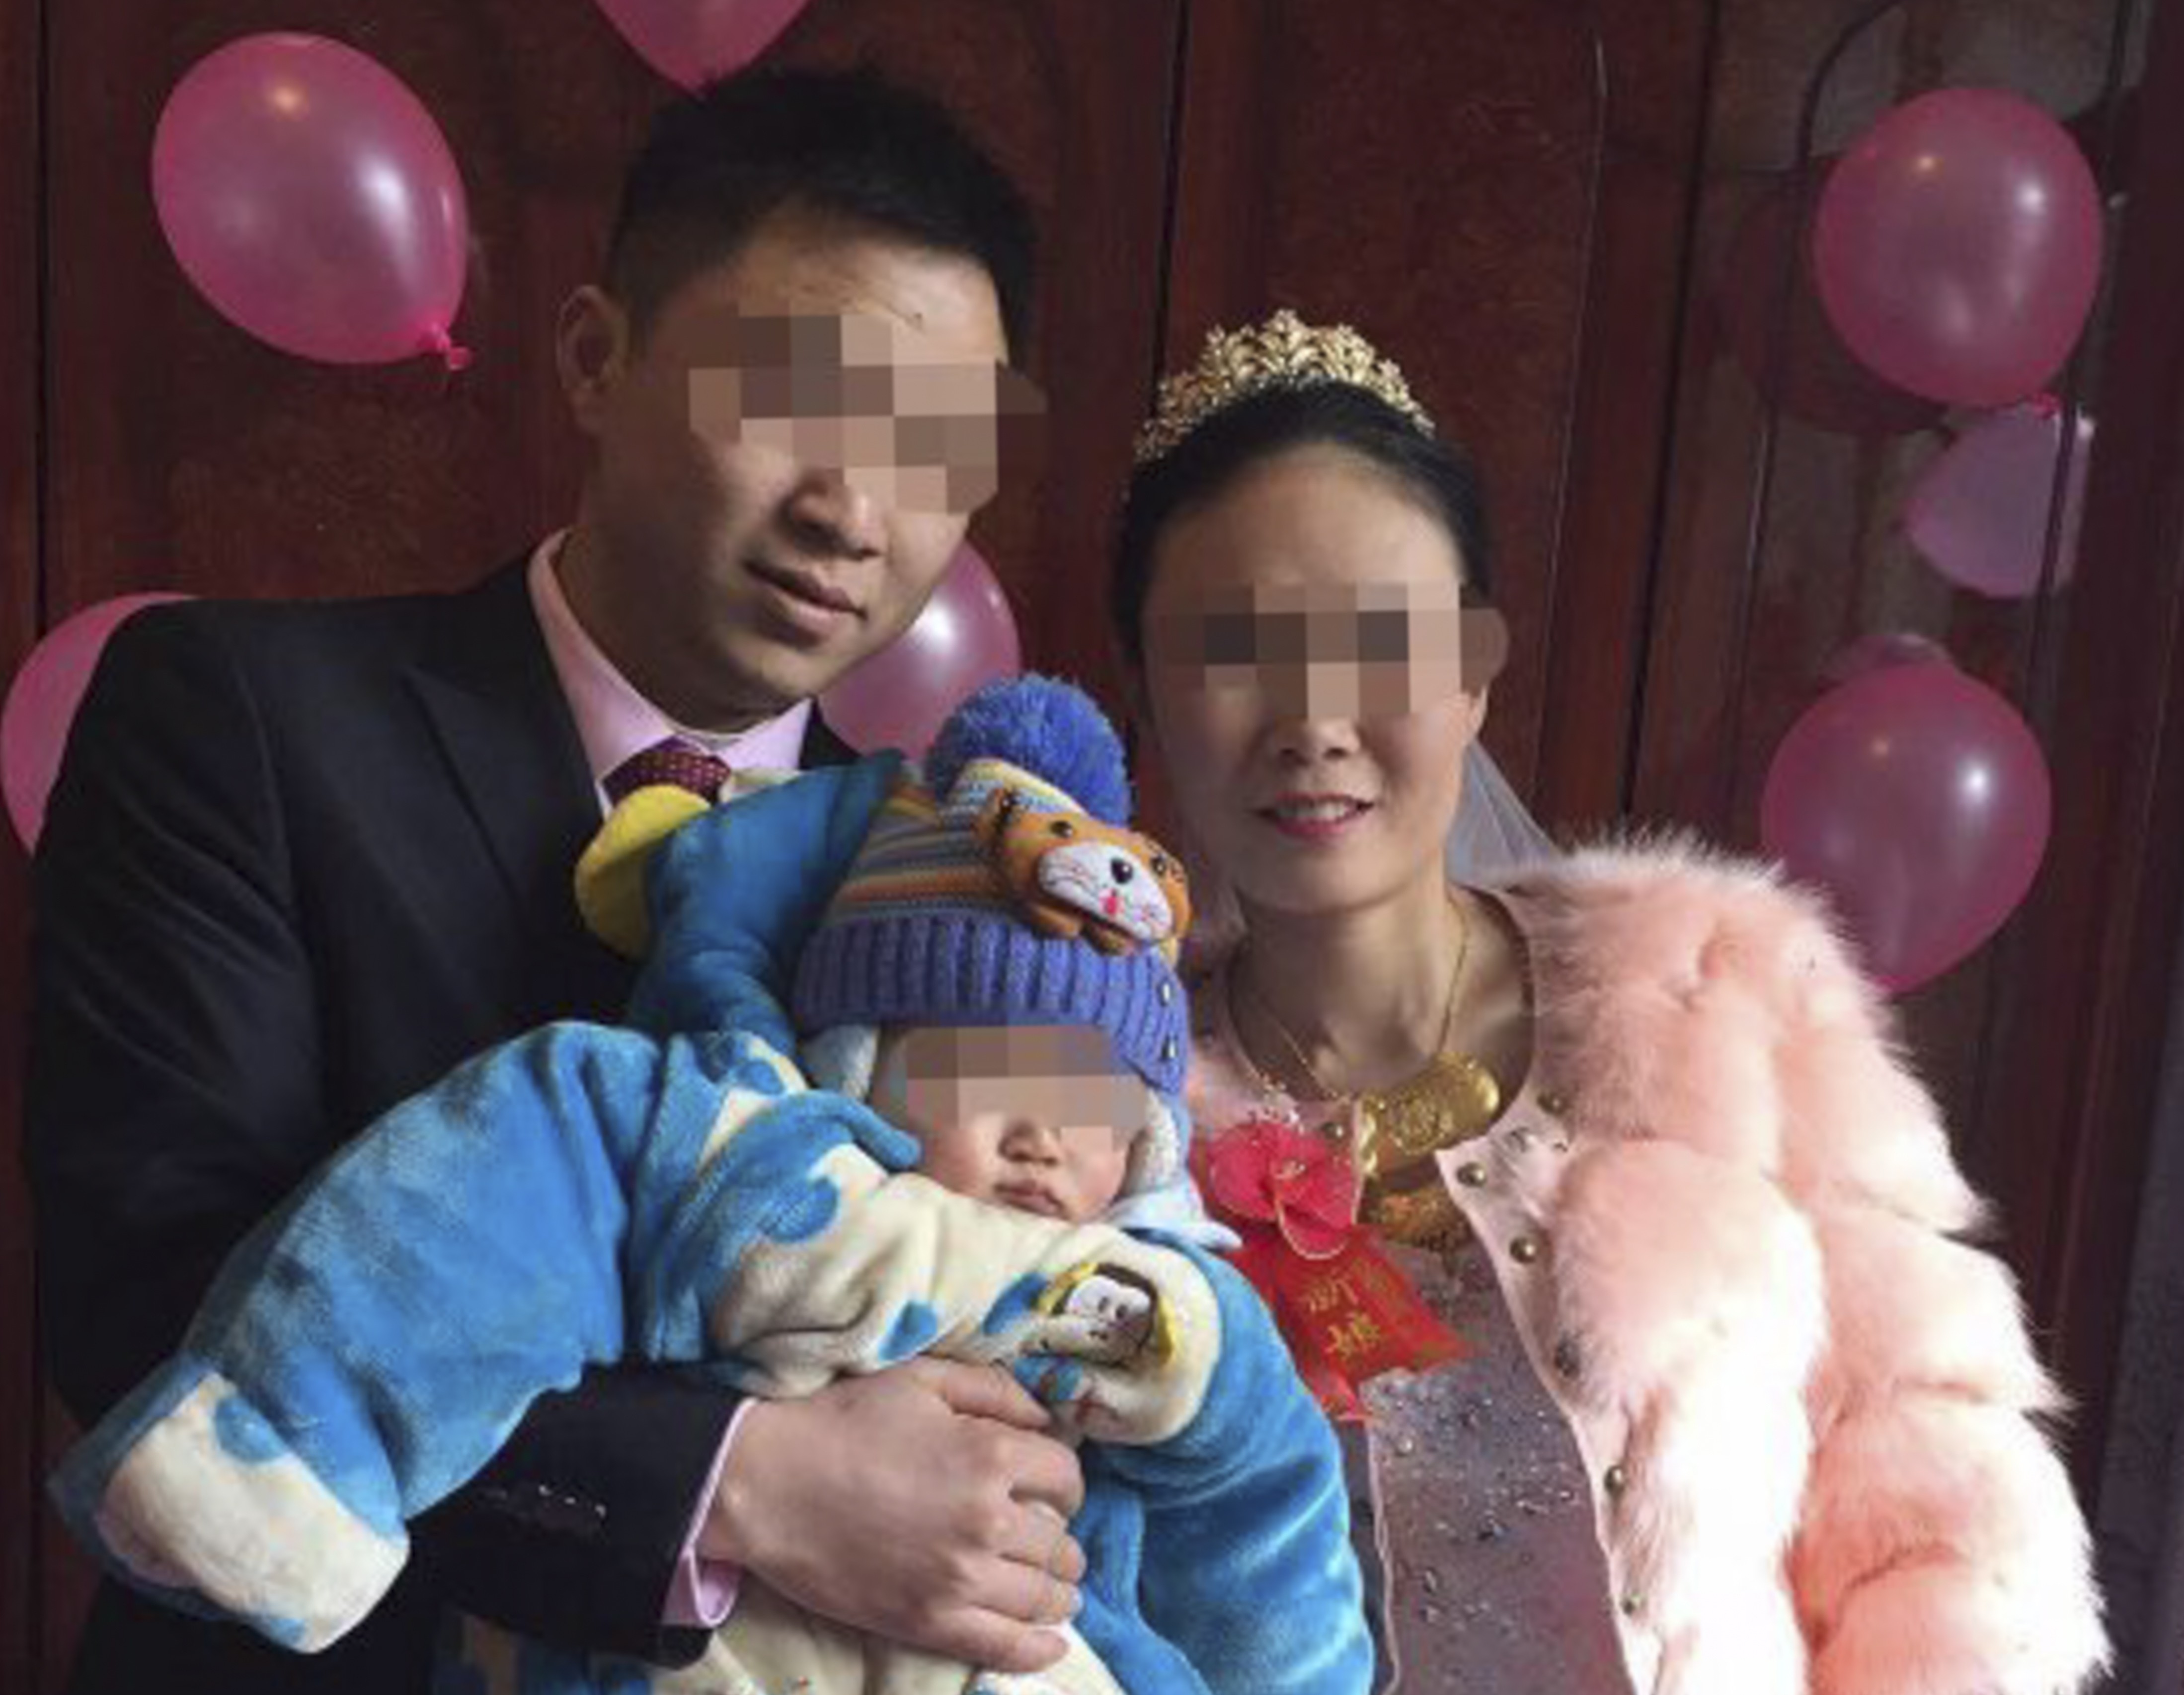 The man who died after drinking with colleagues, pictured with his wife and young child. Photo: Sohu.com